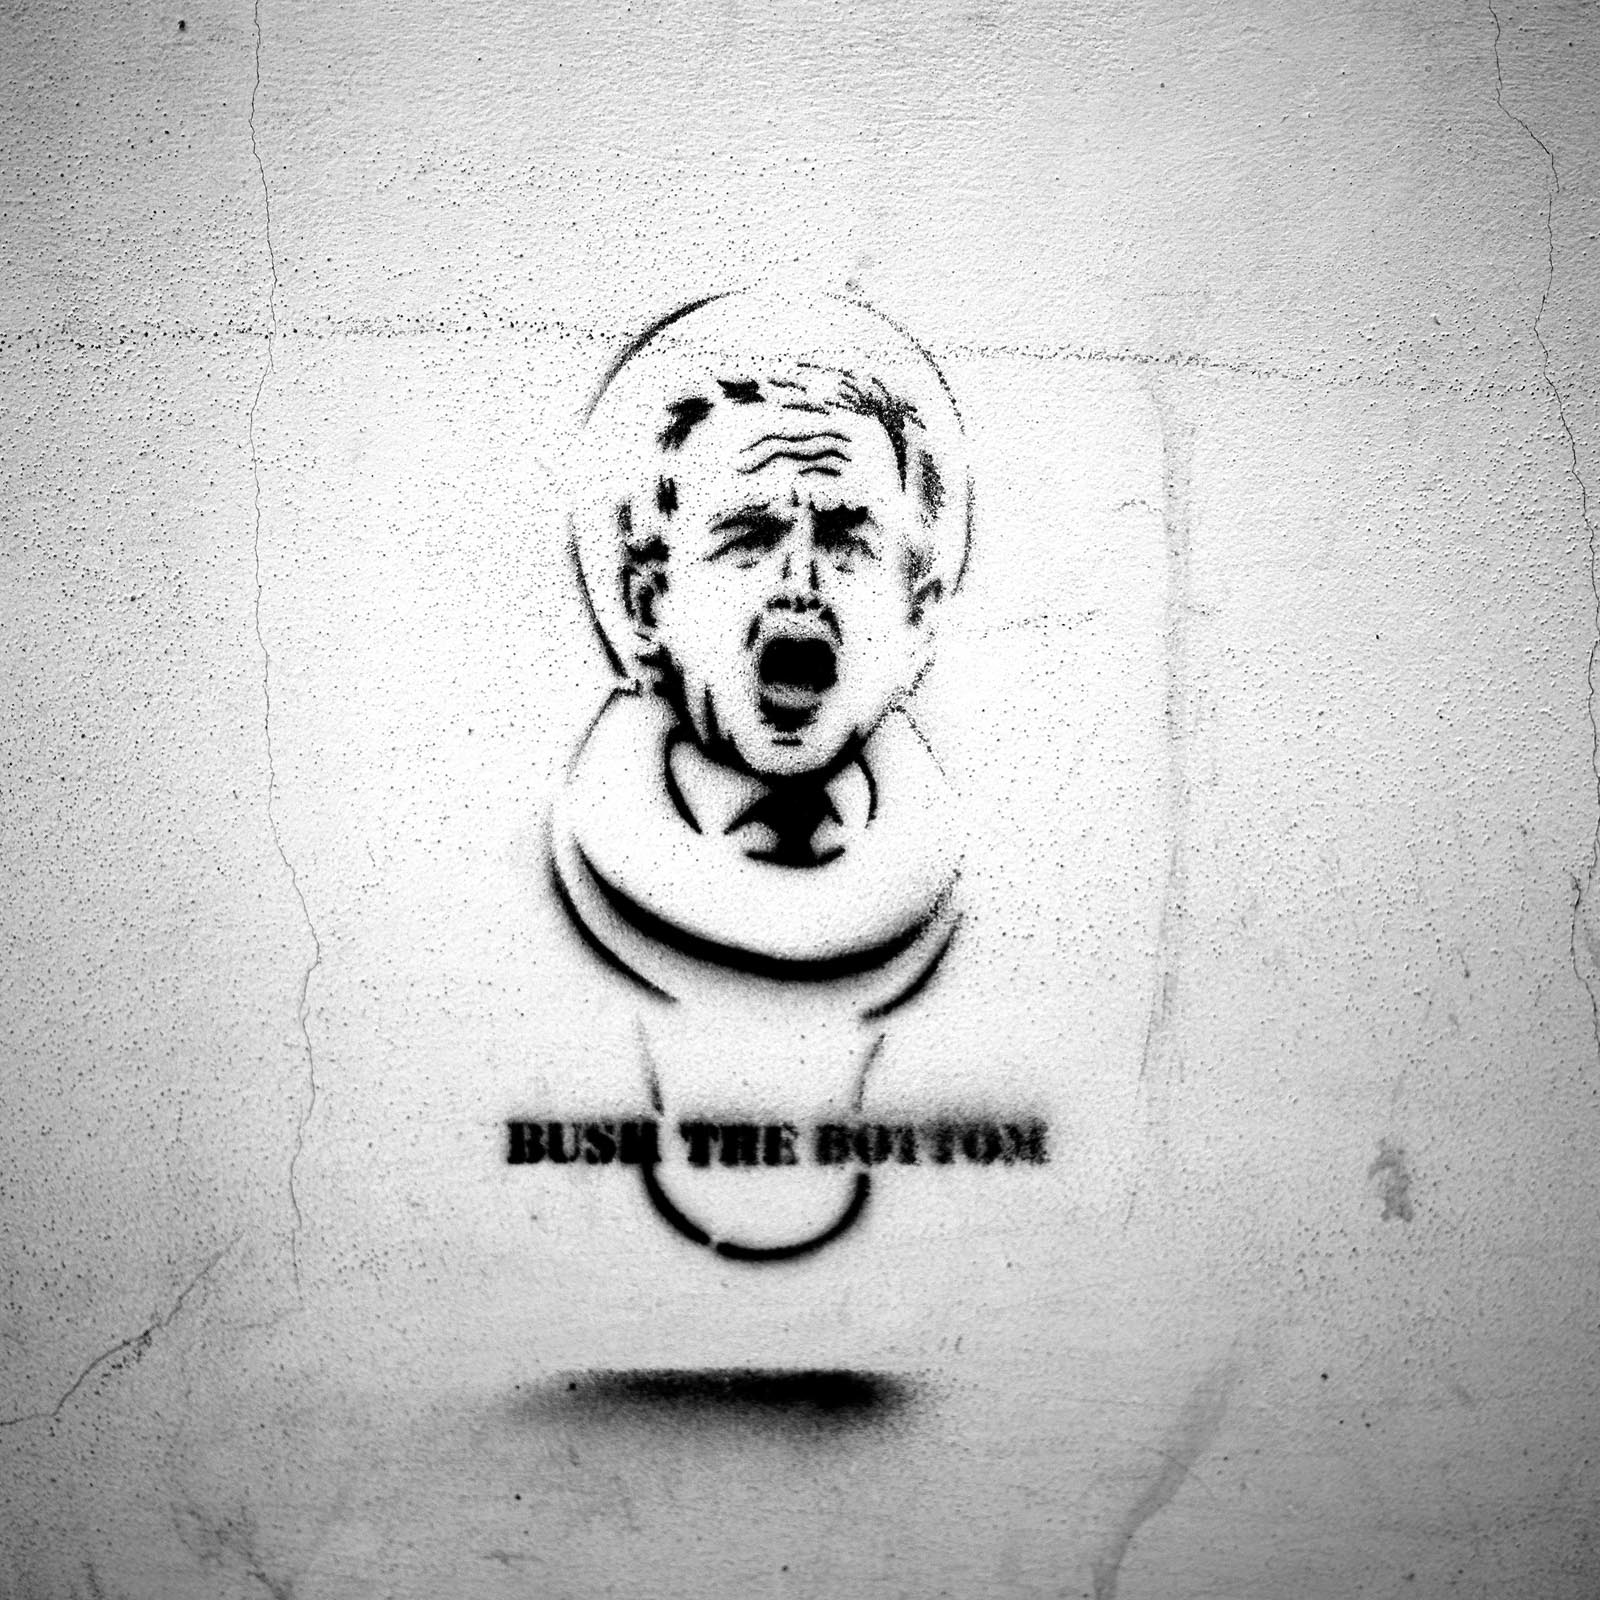 The Stencil invades the streets of Buenos Aires